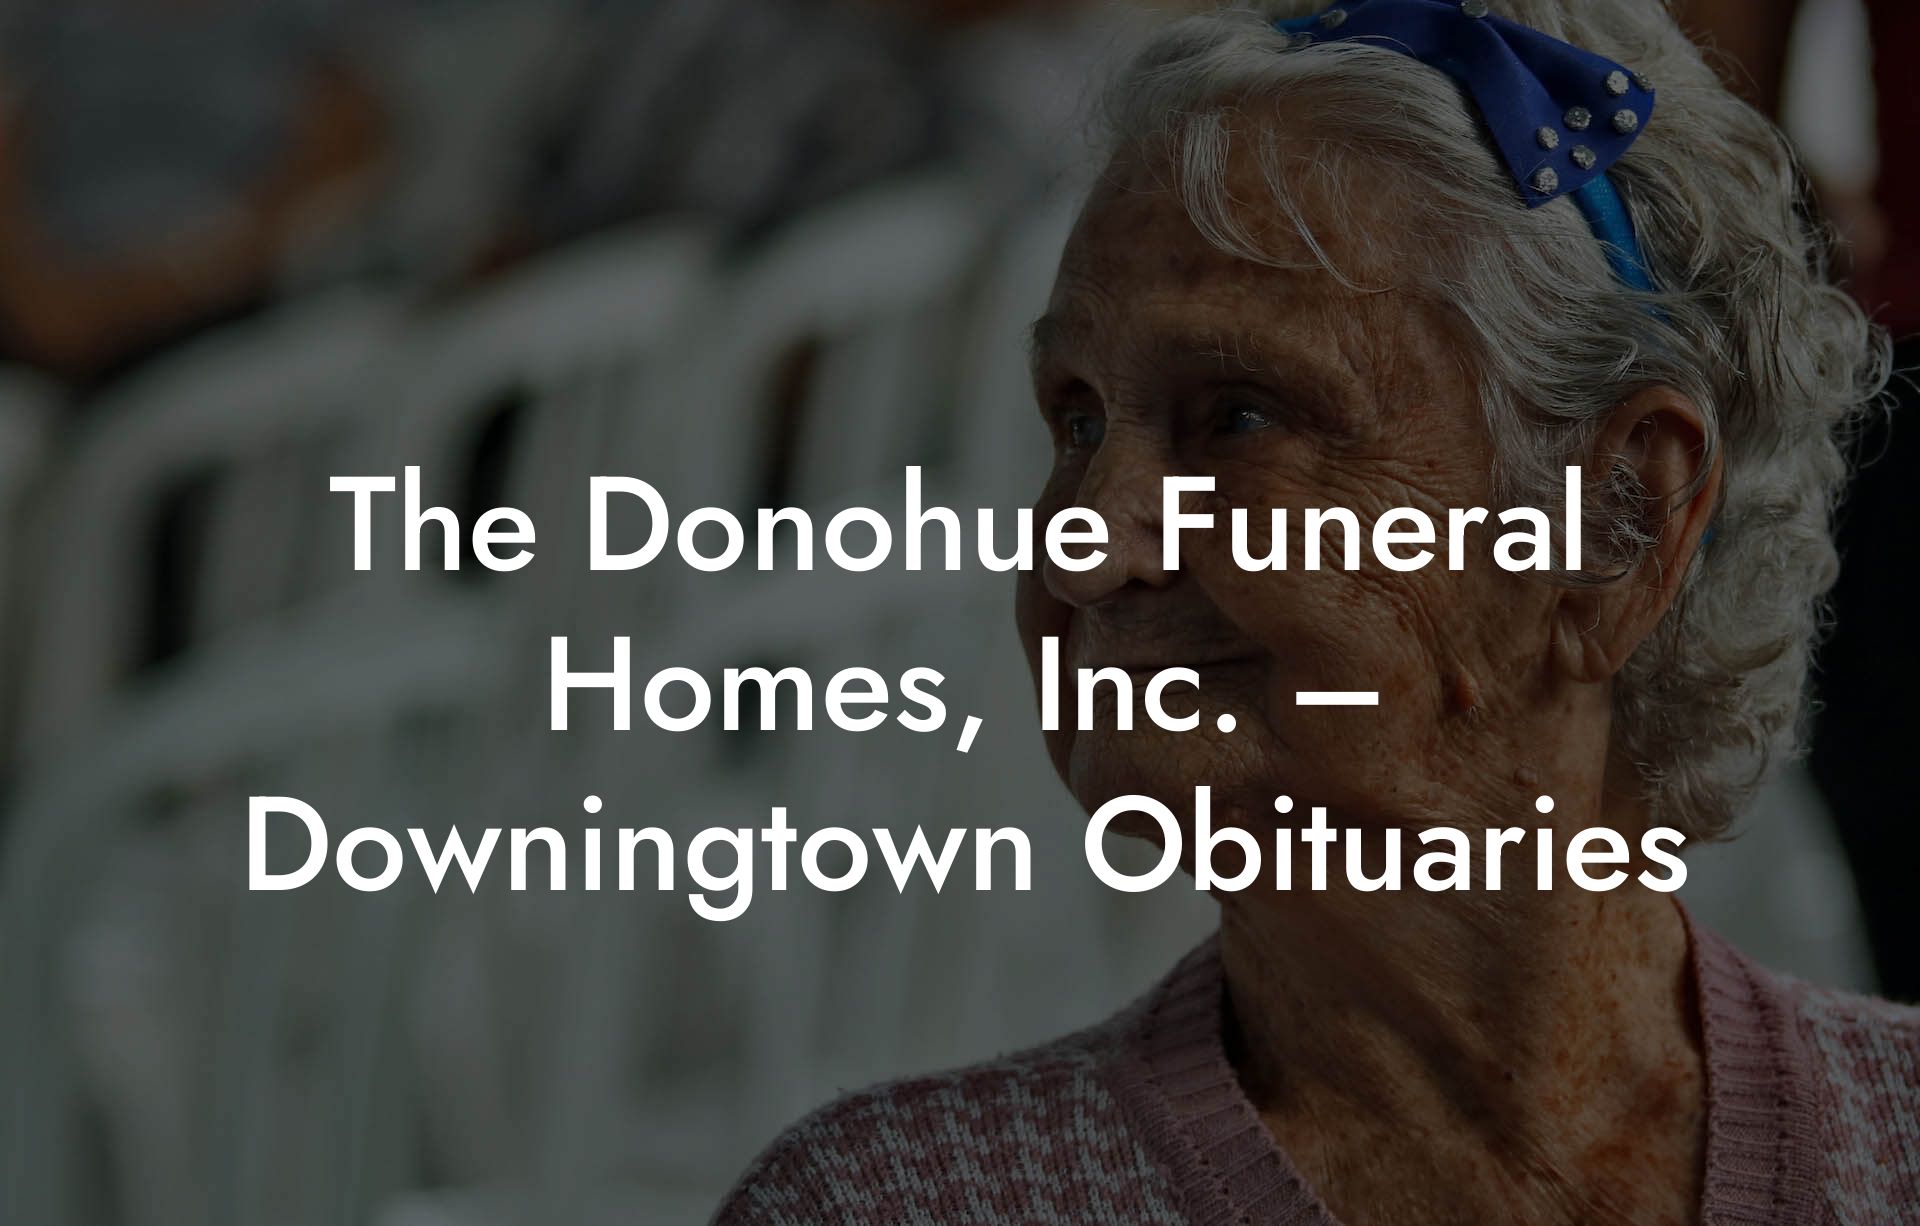 The Donohue Funeral Homes, Inc. – Downingtown Obituaries